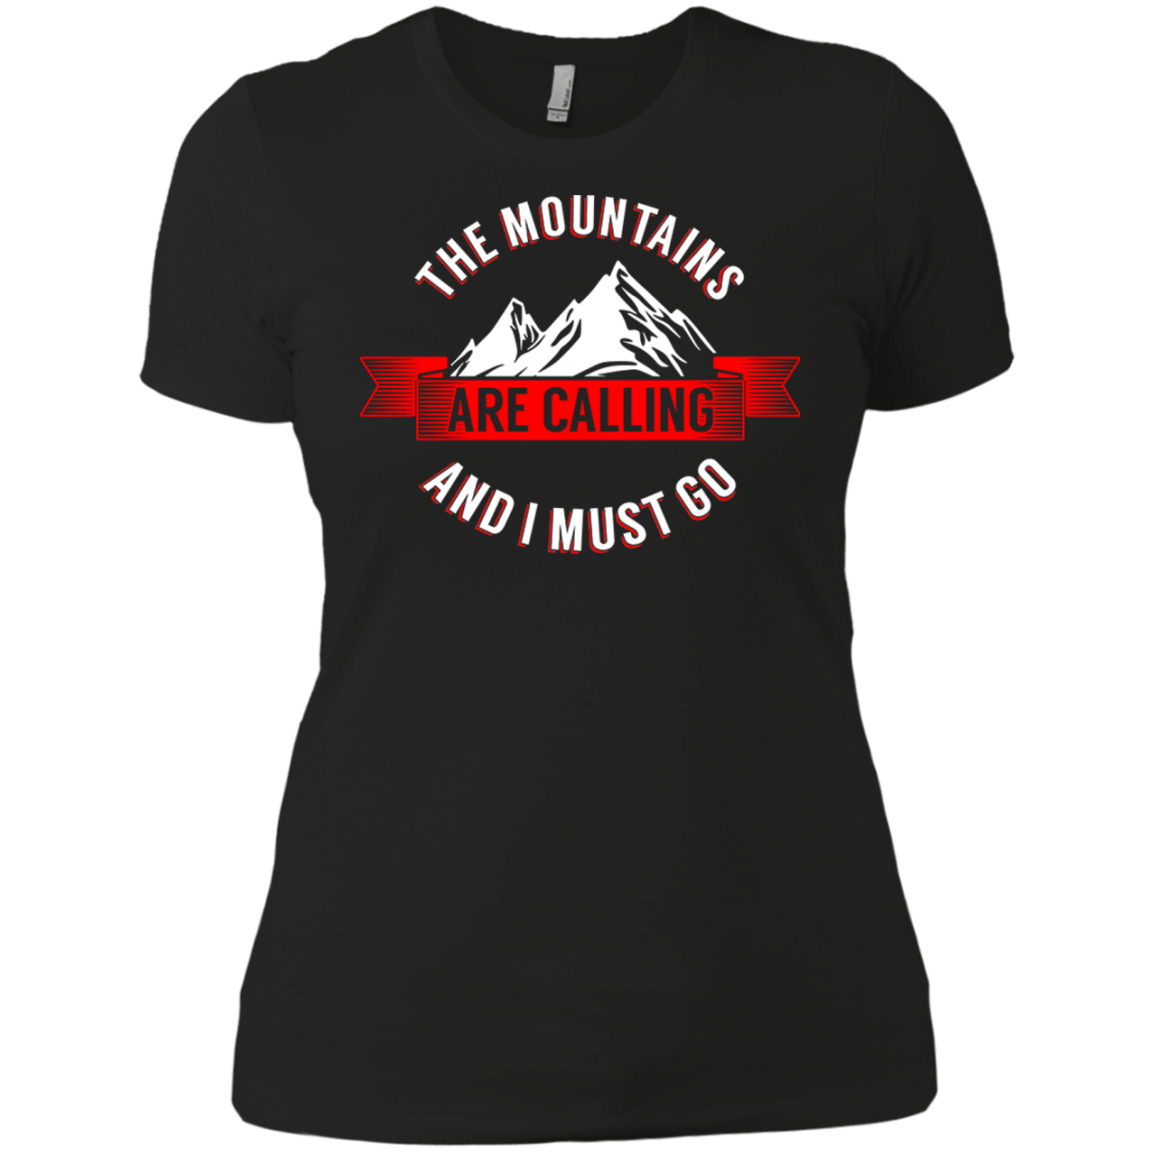 The Mountains Are Calling Ladies Tees - Powderaddicts